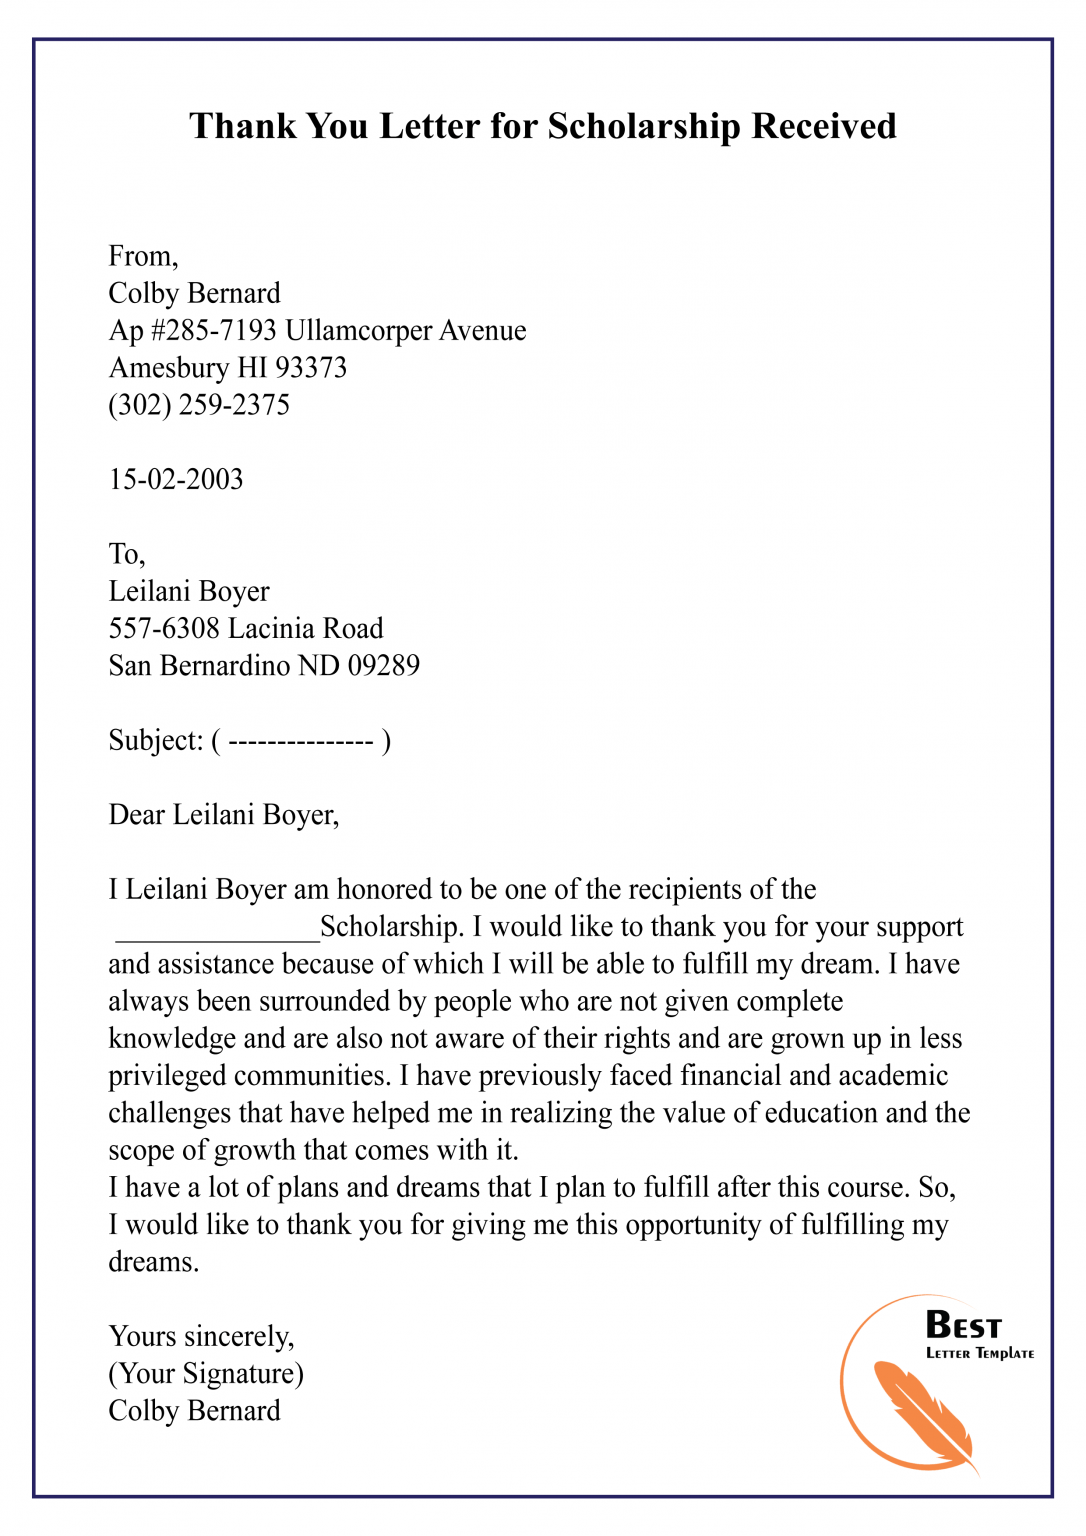 Thank You Letter Template For Scholarship - Sample & Examples